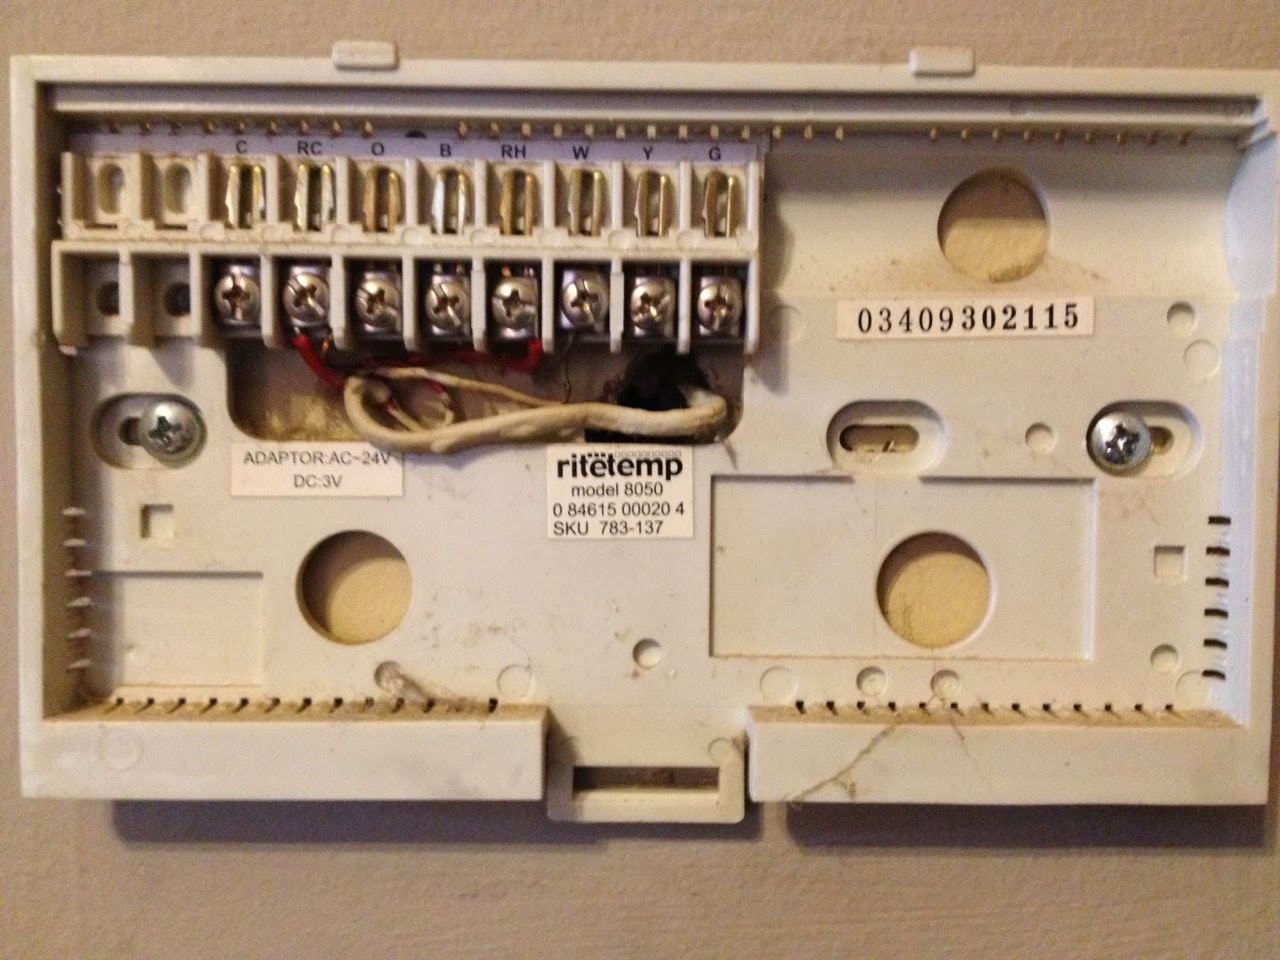 How to Program a Ritetemp Model 8050 Thermostat · Share Your Repair